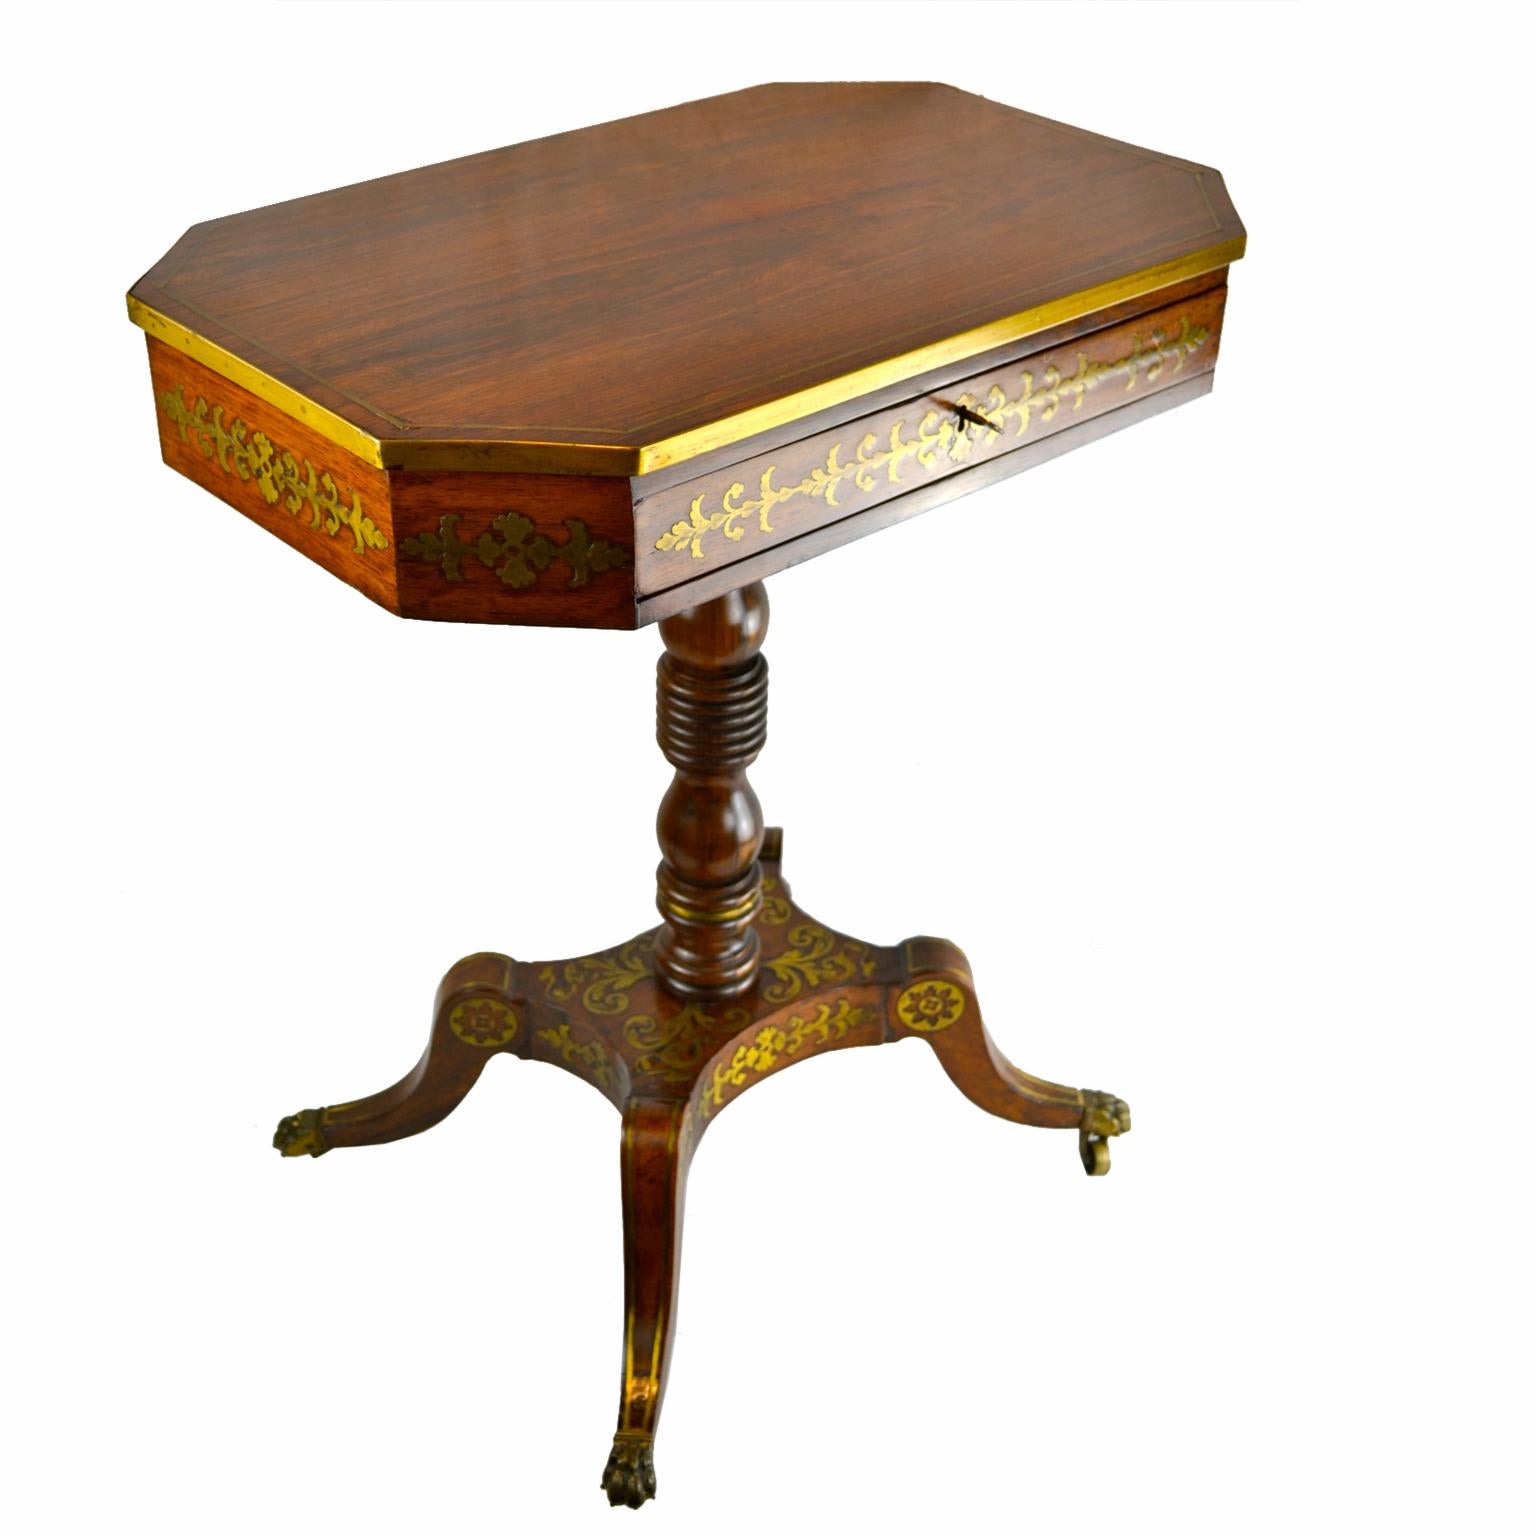 An English Regency rosewood table of the highest quality with the trademark inset brass decoration. The octagonal top is framed in brass over a richly decorated apron with a drawer to one side; the top is supported on a turned column attached to a